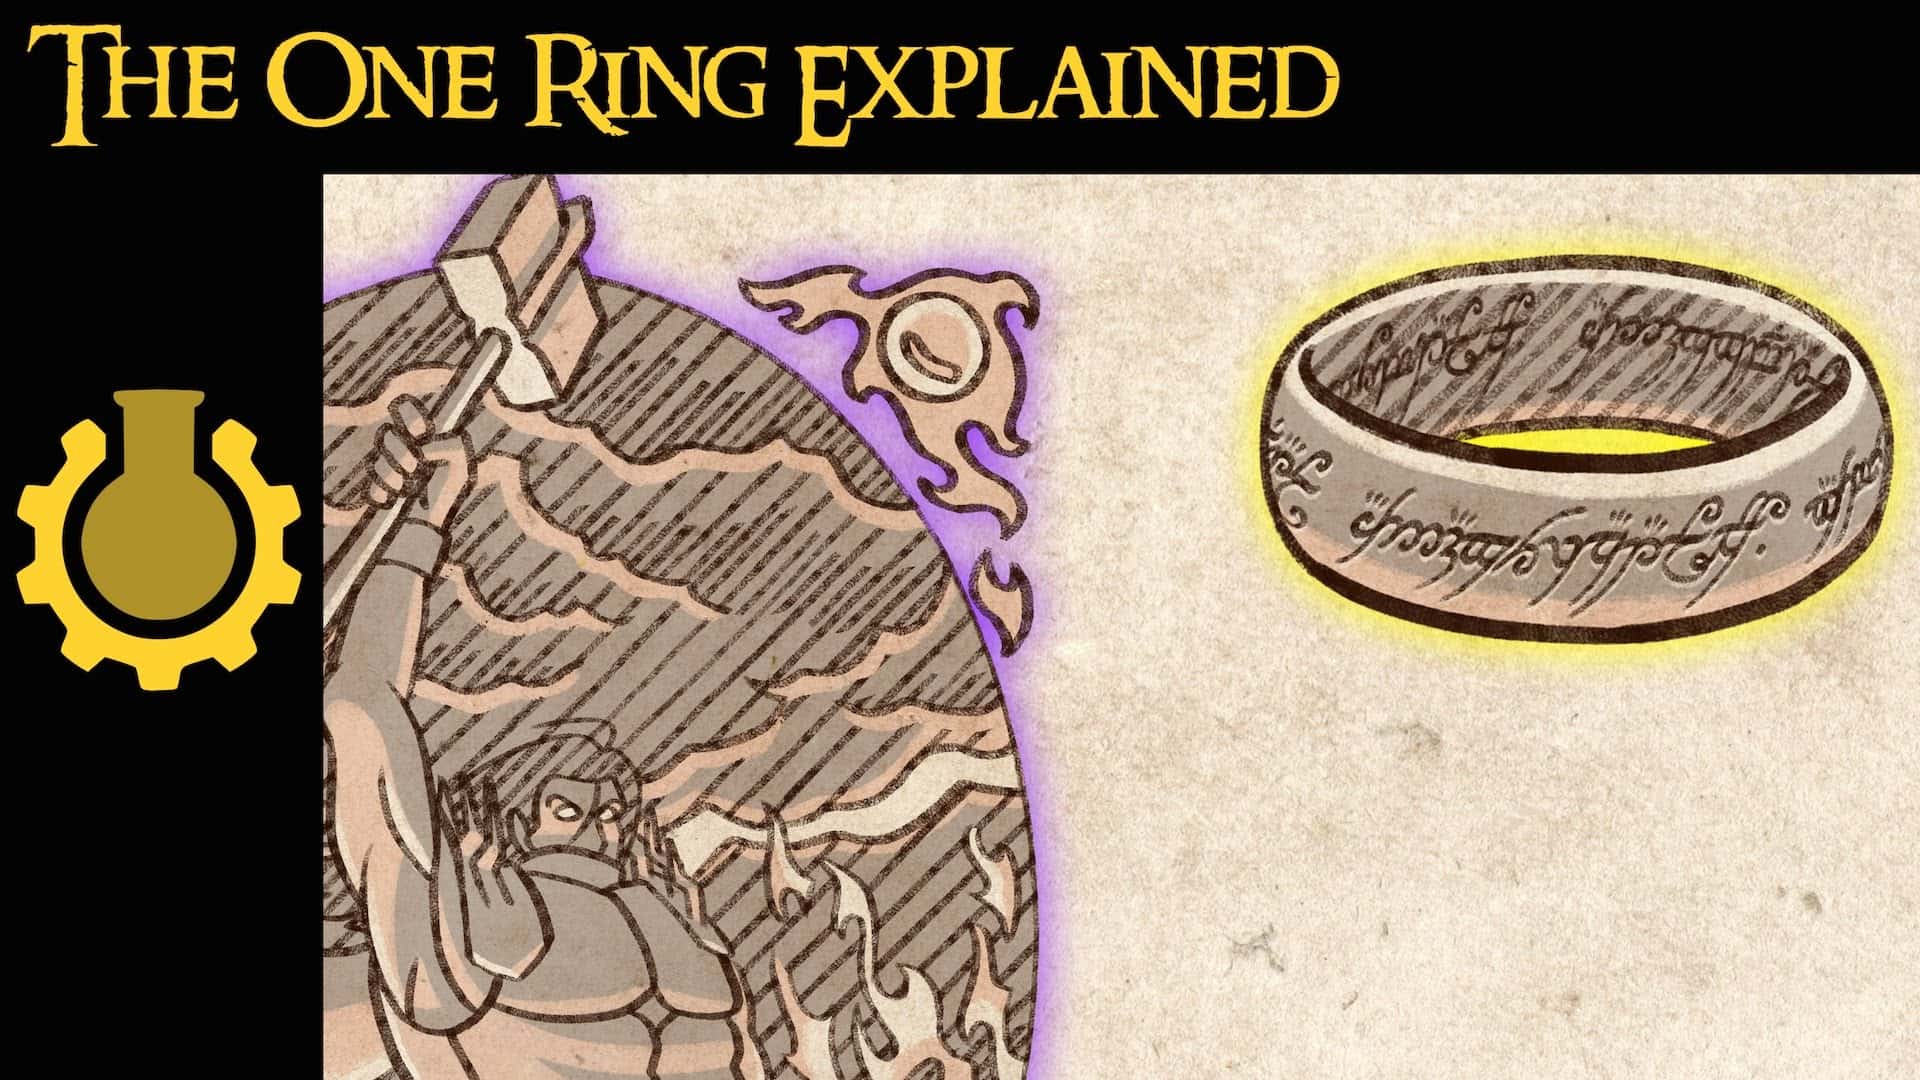 The powers of the one ring explained